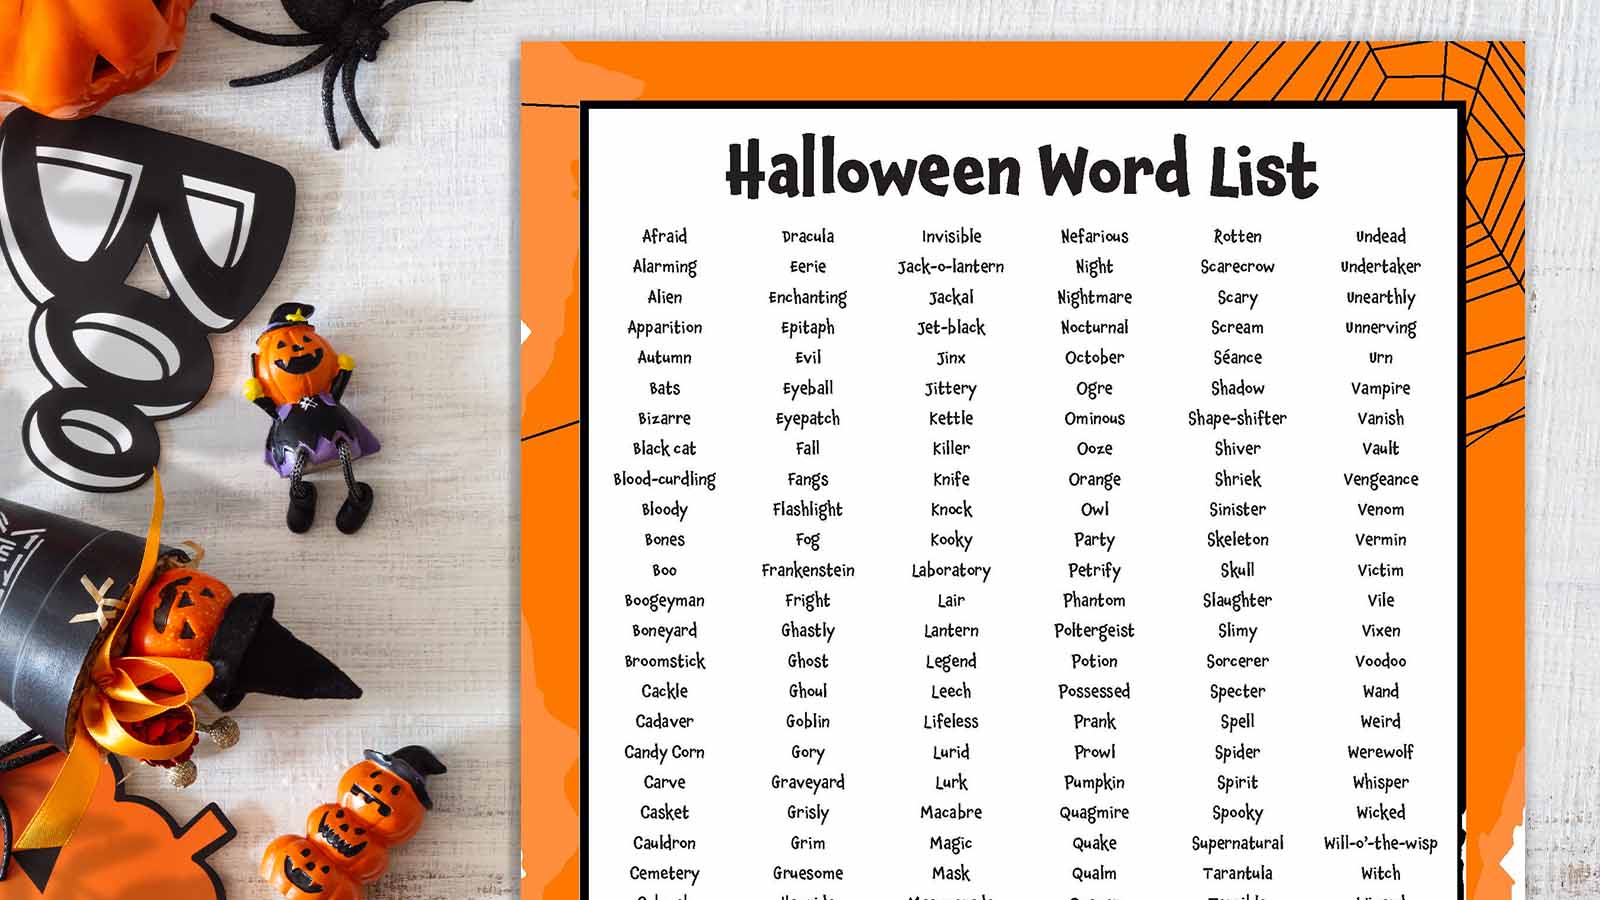 Halloween Word Lists Feature (1)